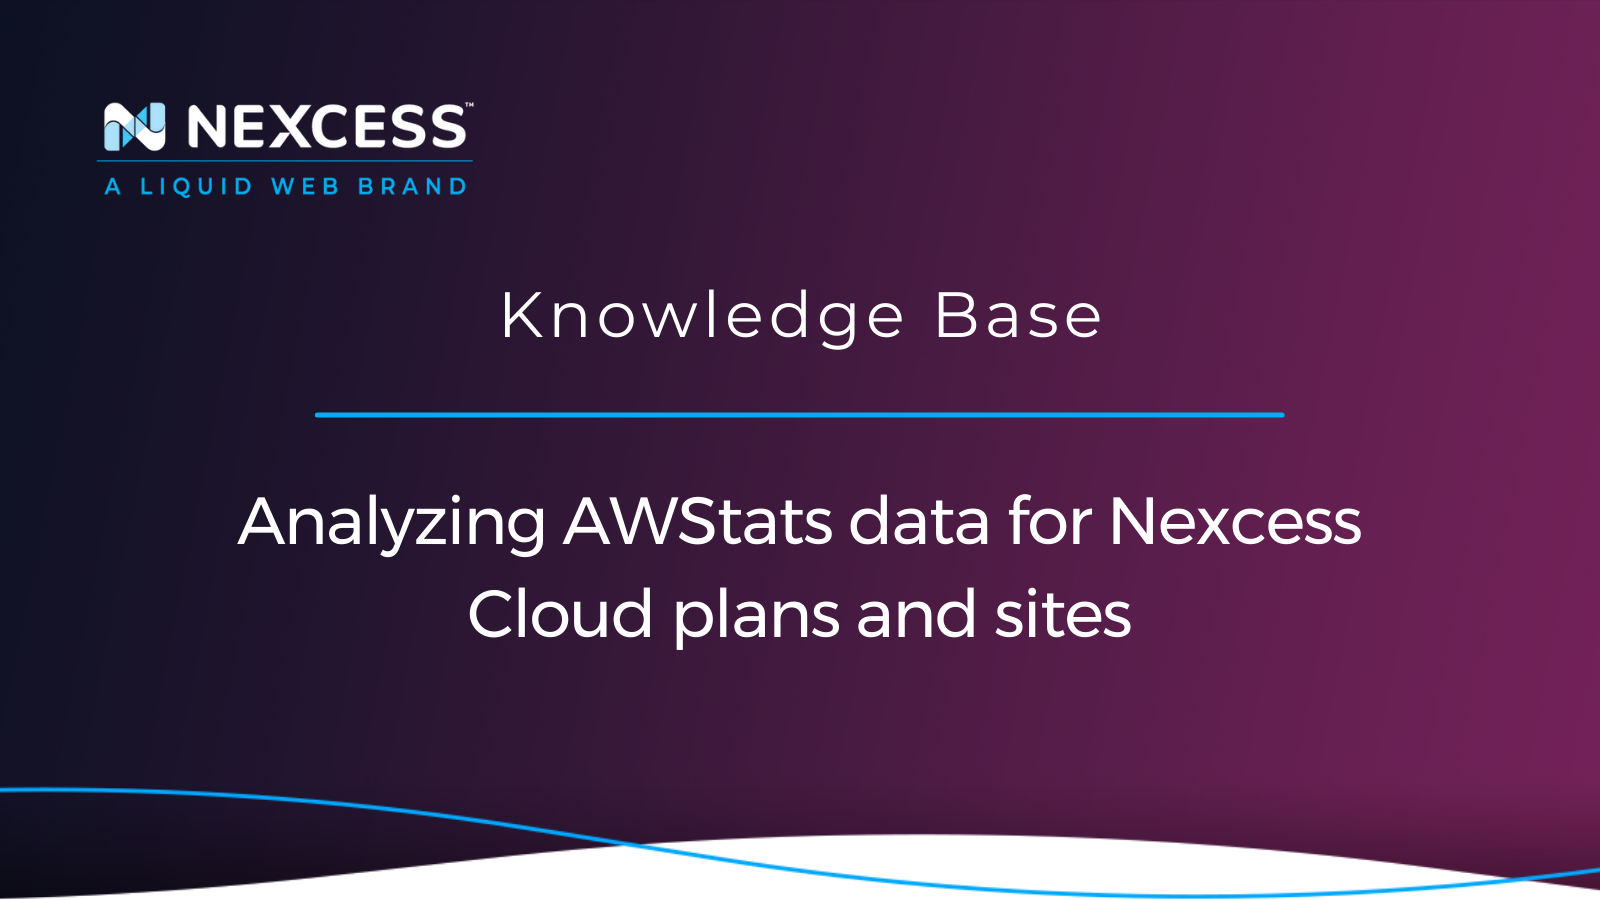 Analyzing AWStats data for Nexcess Cloud plans and sites